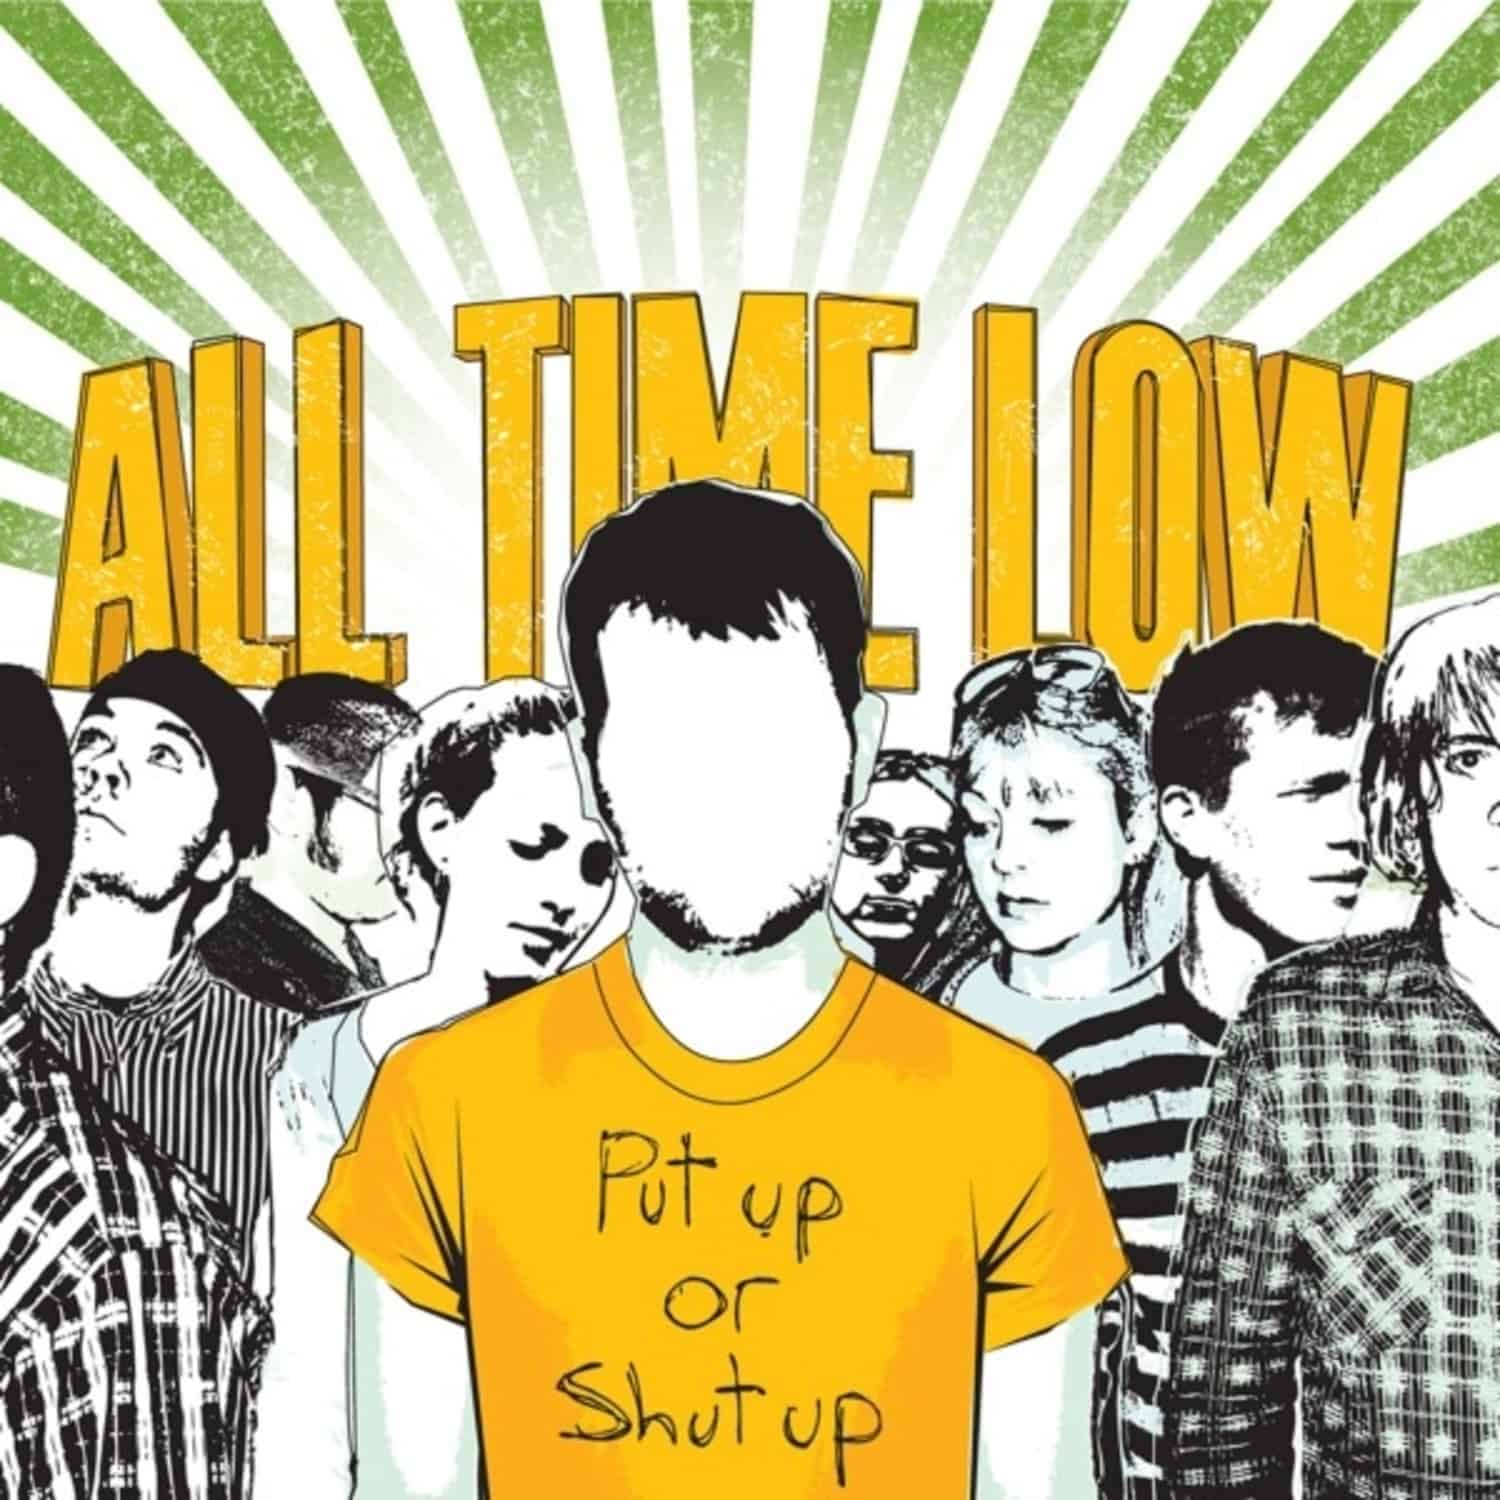 All Time Low - PUT UP OR SHUT UP - YELLOW VINYL 